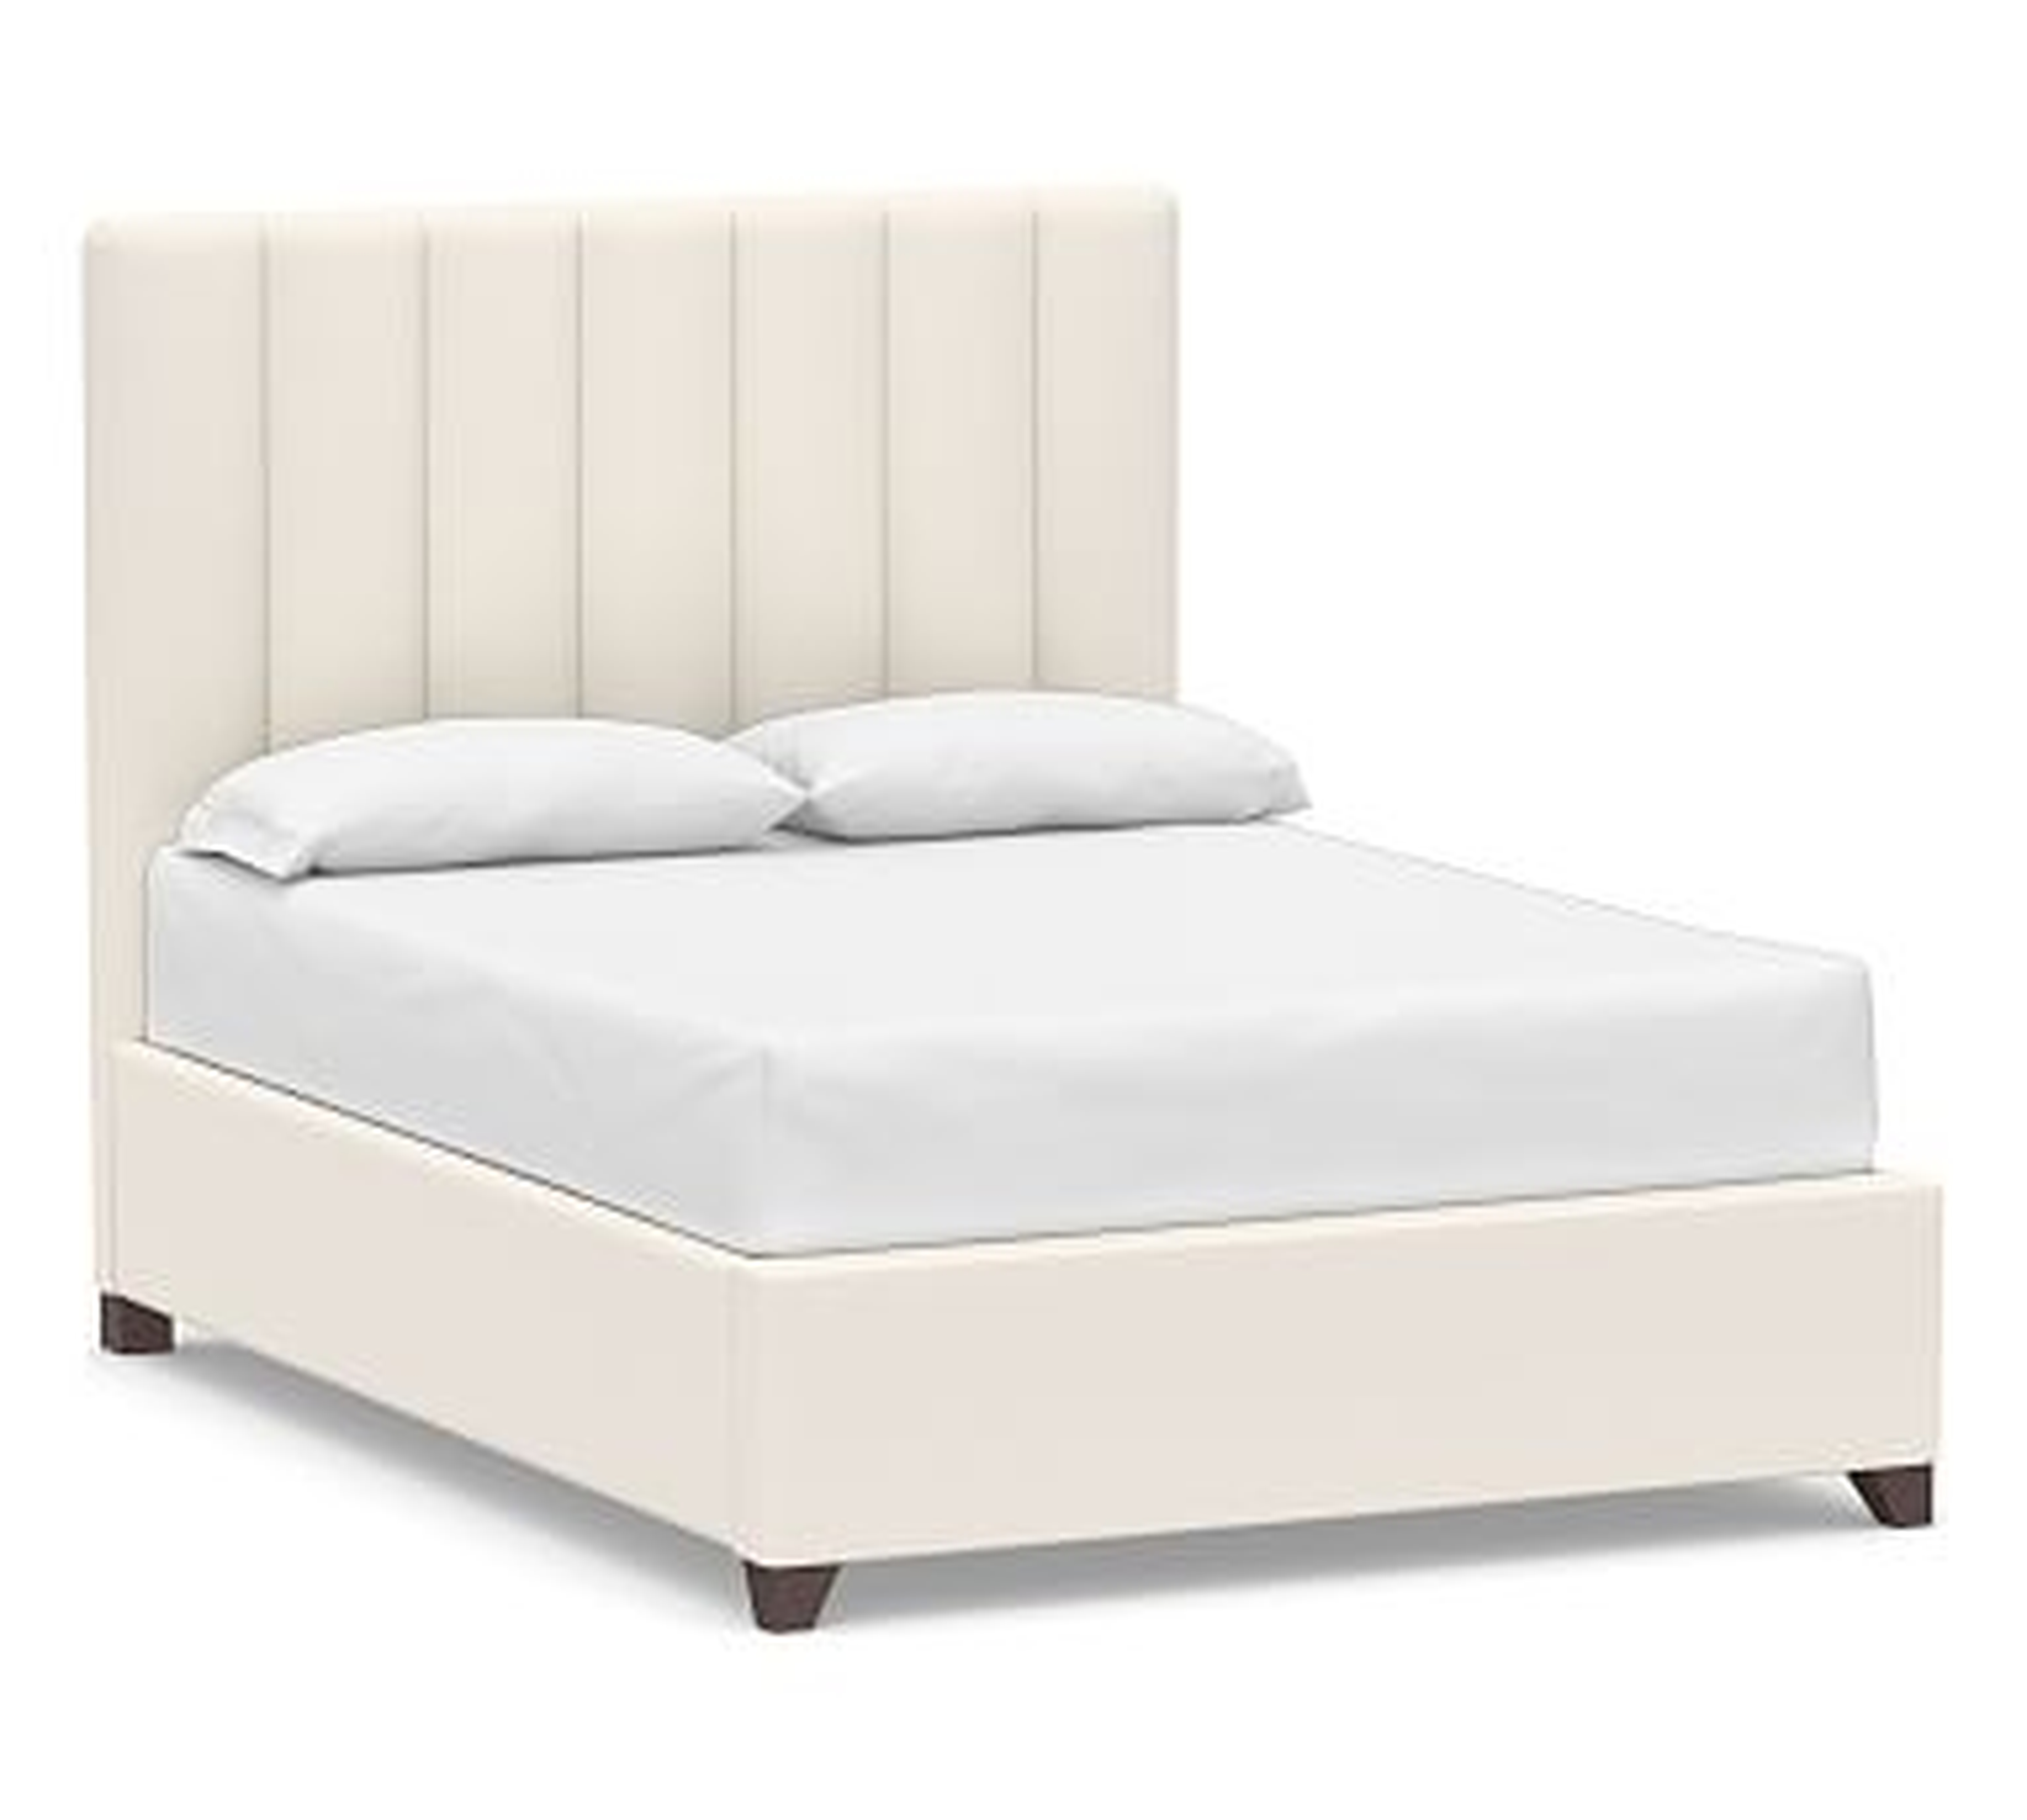 Kira Channel Tufted Upholstered Bed, King, Performance Chateau Basketweave Ivory - Pottery Barn